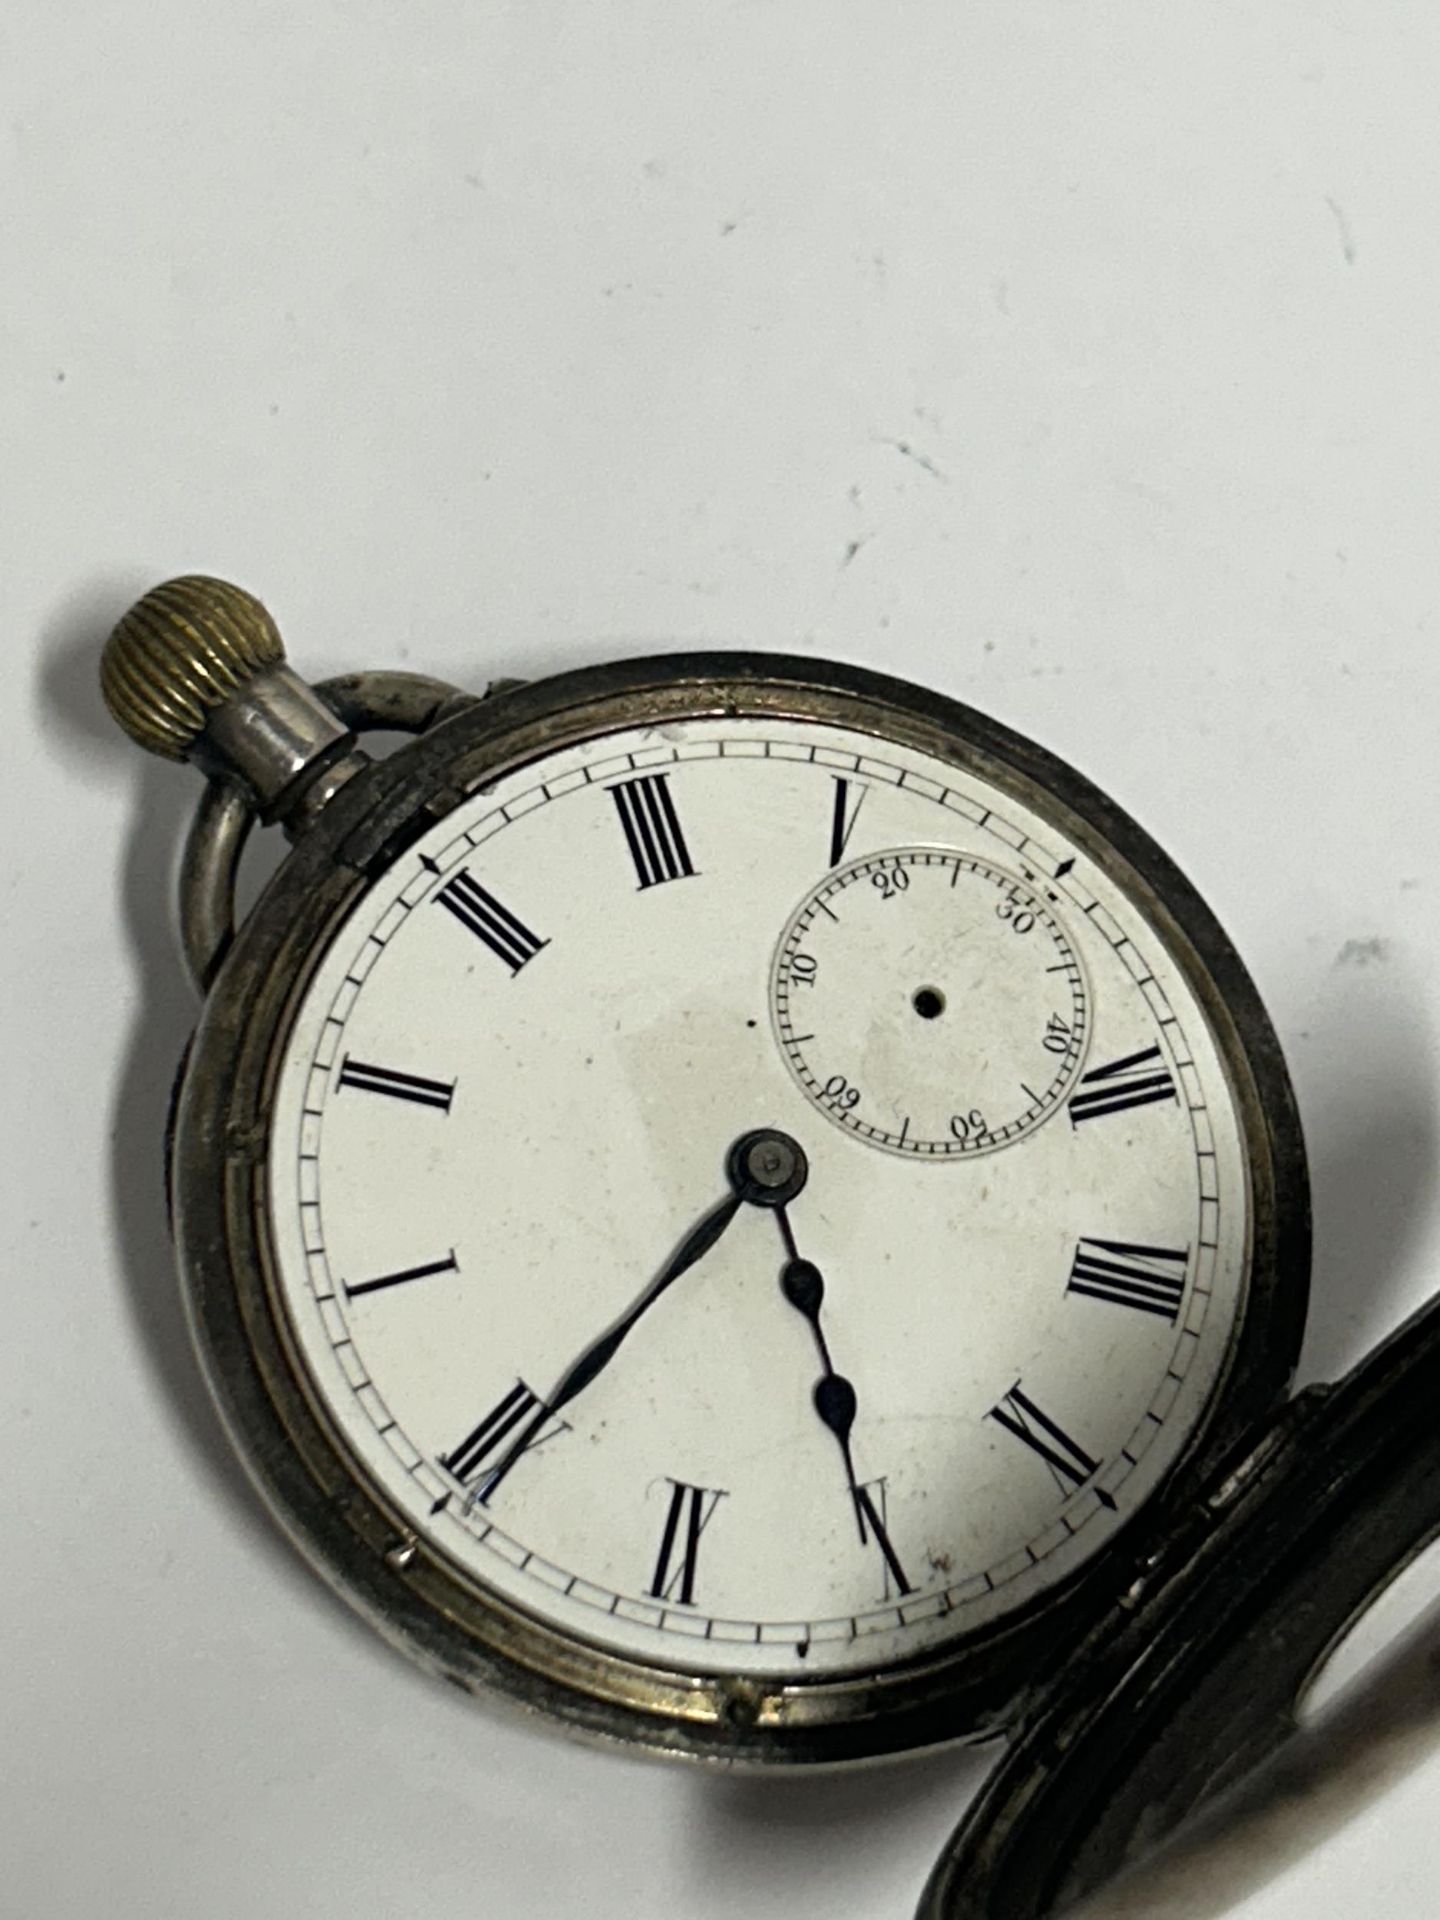 A .935 SILVER HALF HUNTER POCKET WATCH GROSS WEIGHT 77.57 GRAMS, REQUIRES ATTENTION - Image 3 of 5